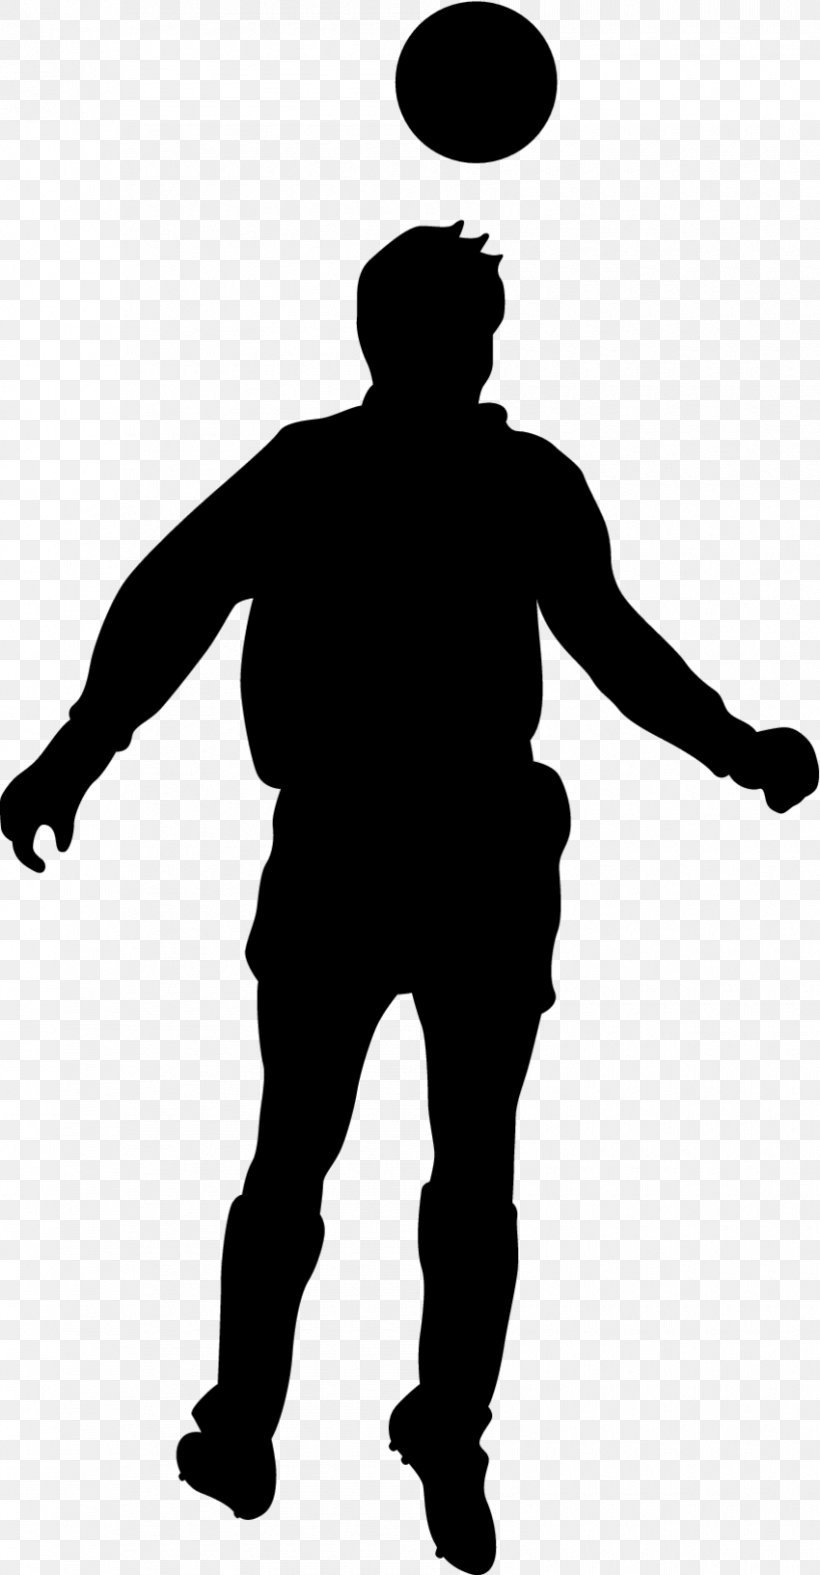 Football Player Wall Decal Silhouette, PNG, 850x1633px, Football, Black, Black And White, Decal, Football Player Download Free